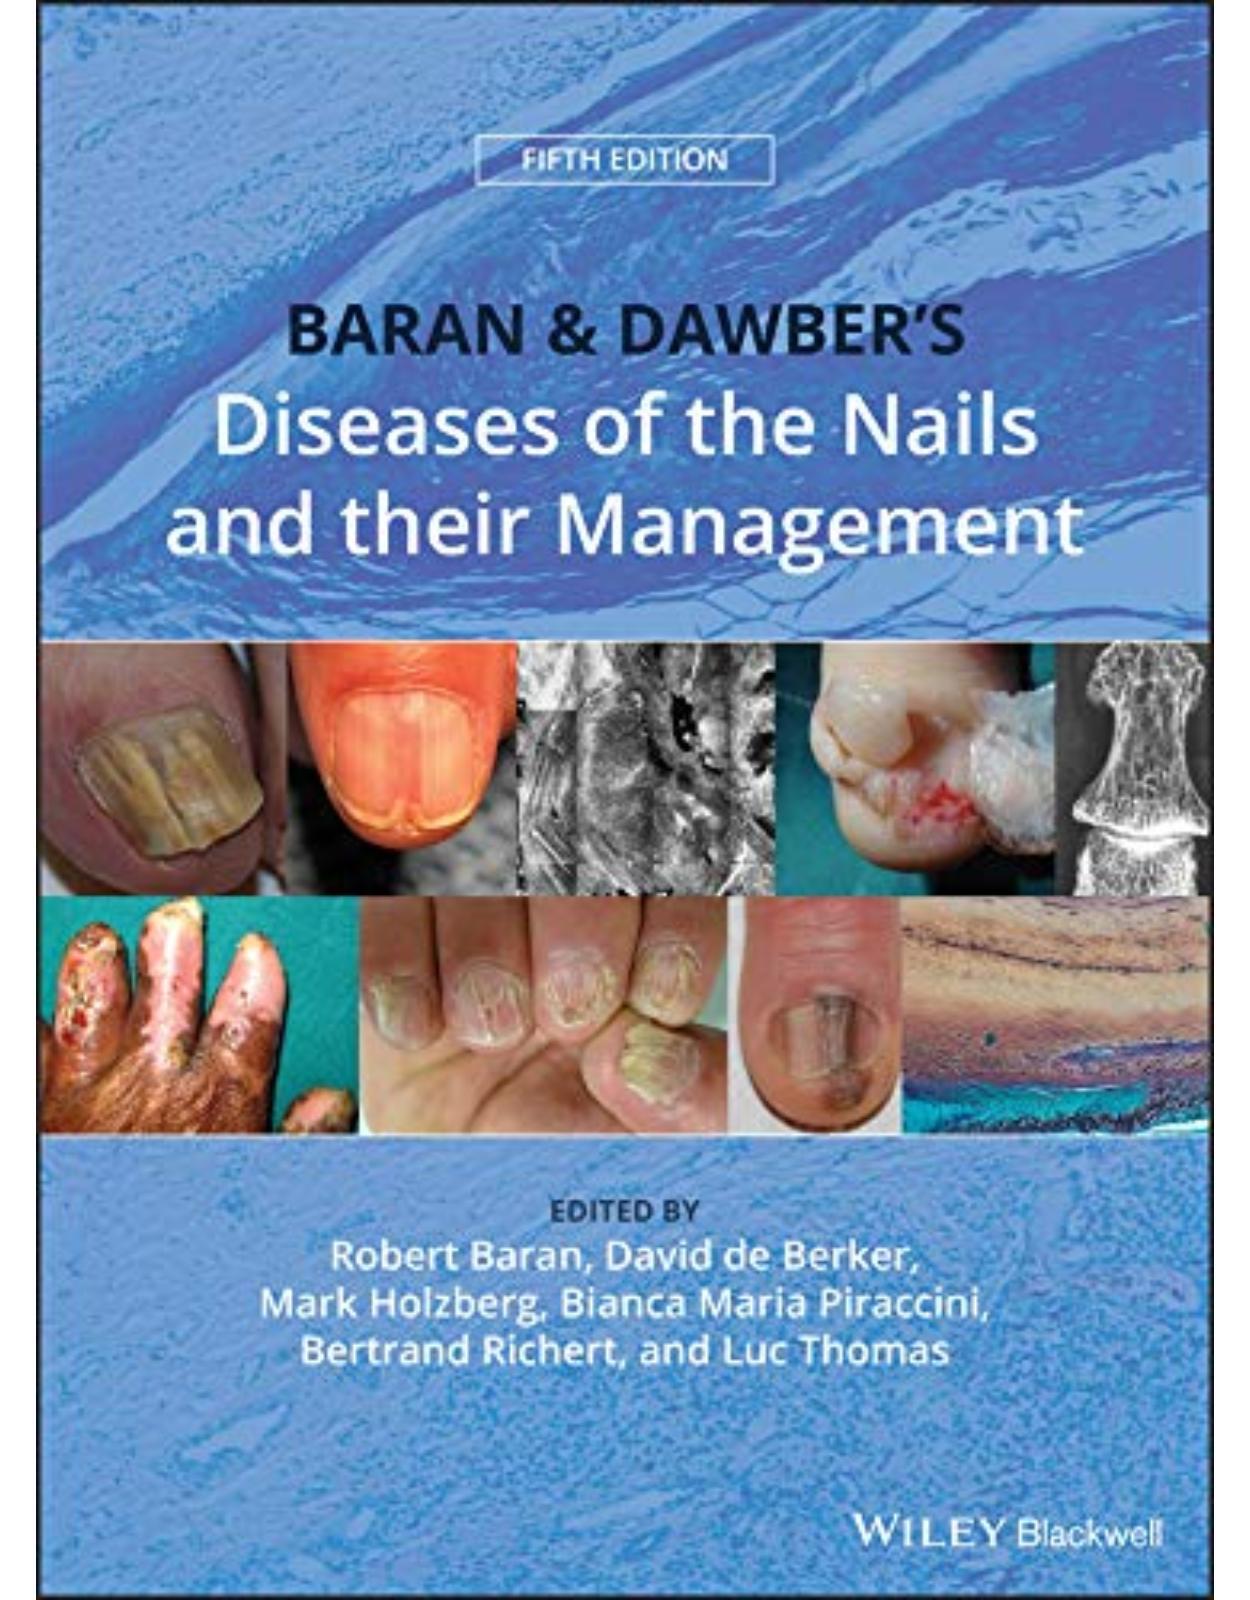 Baran and Dawber’s Diseases of the Nails and their Management, 5th Edition